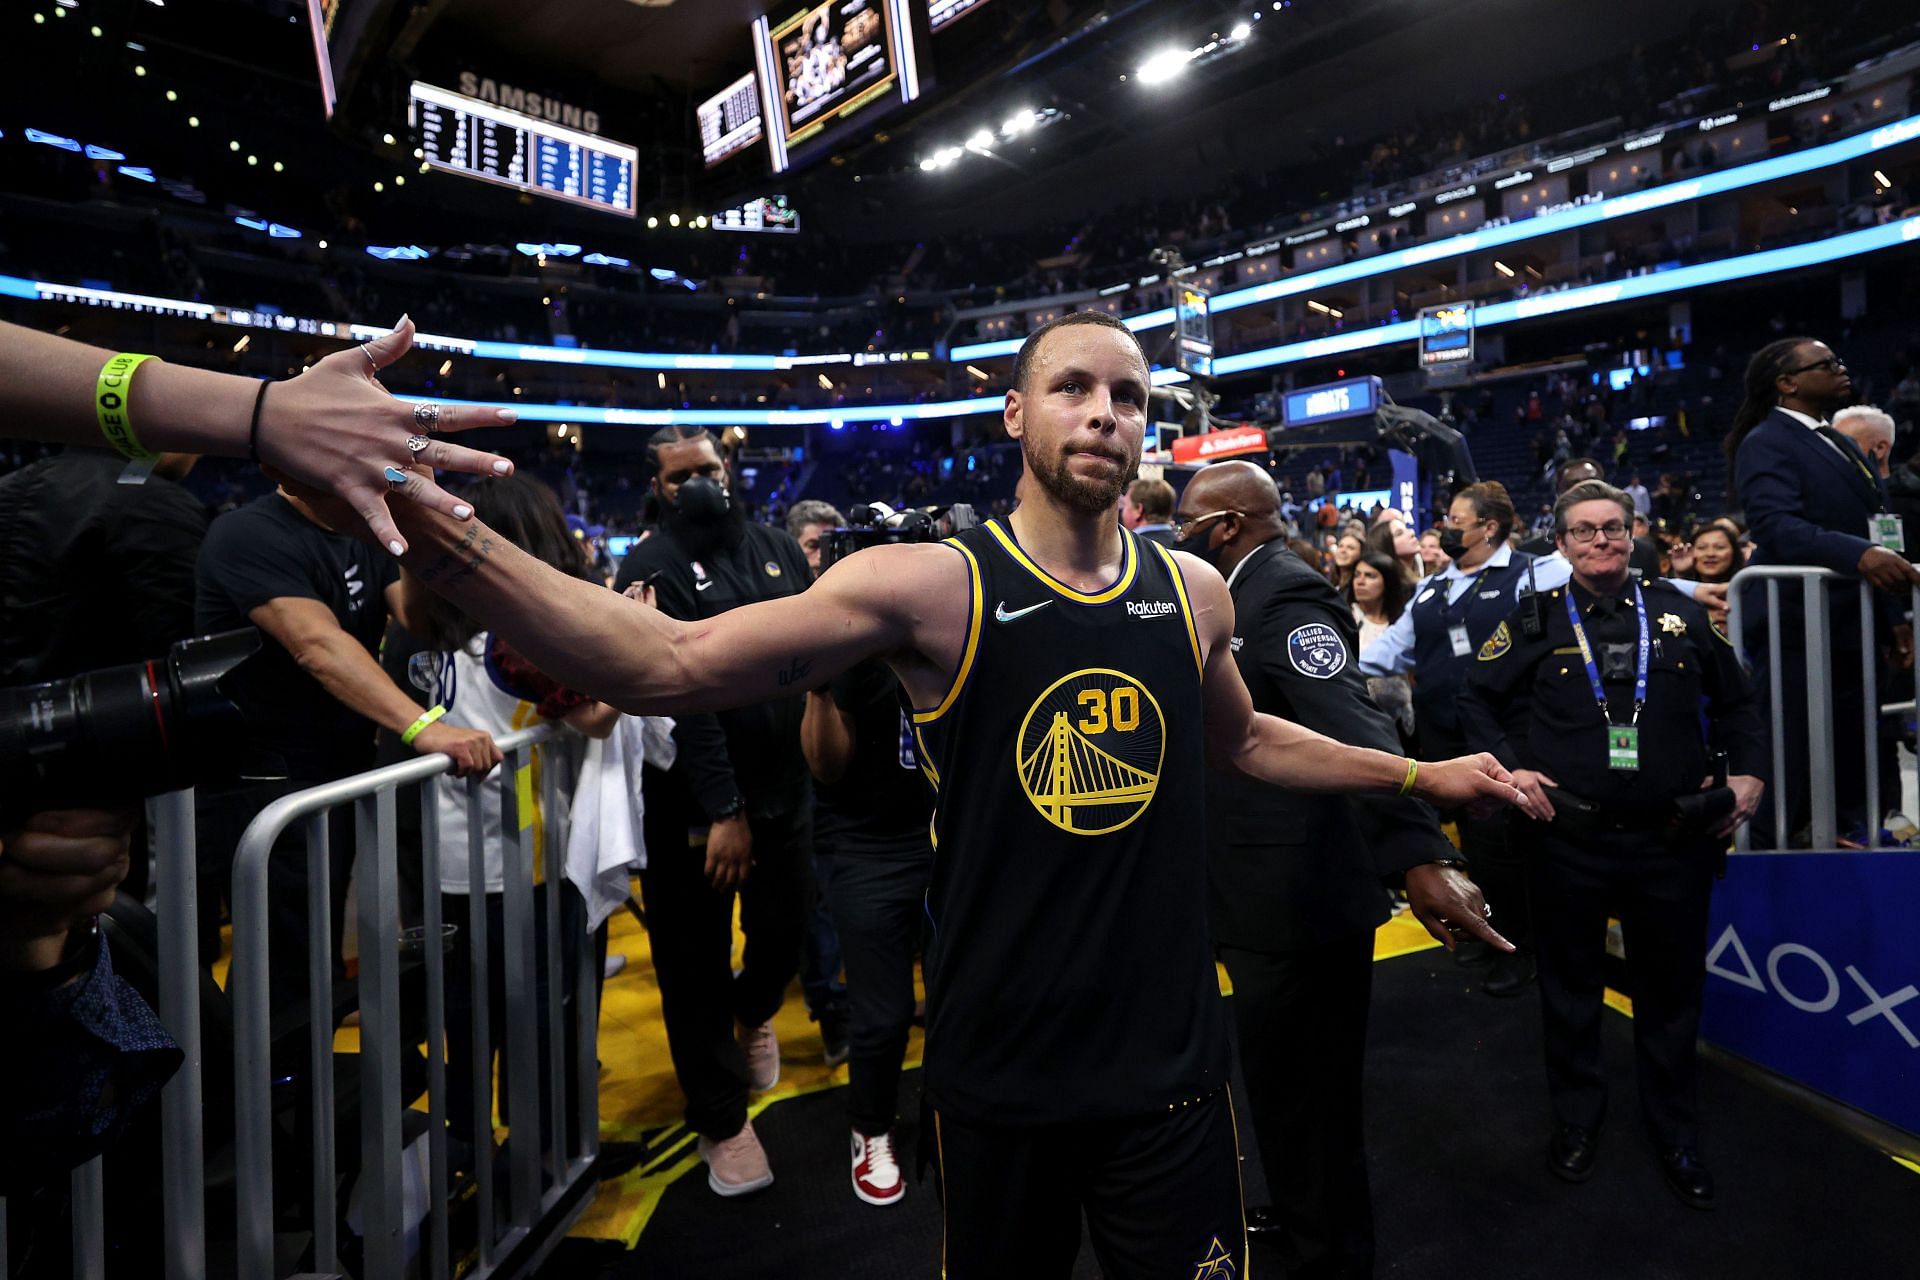 Steph Curry of the Golden State Warriors at the Chase Center